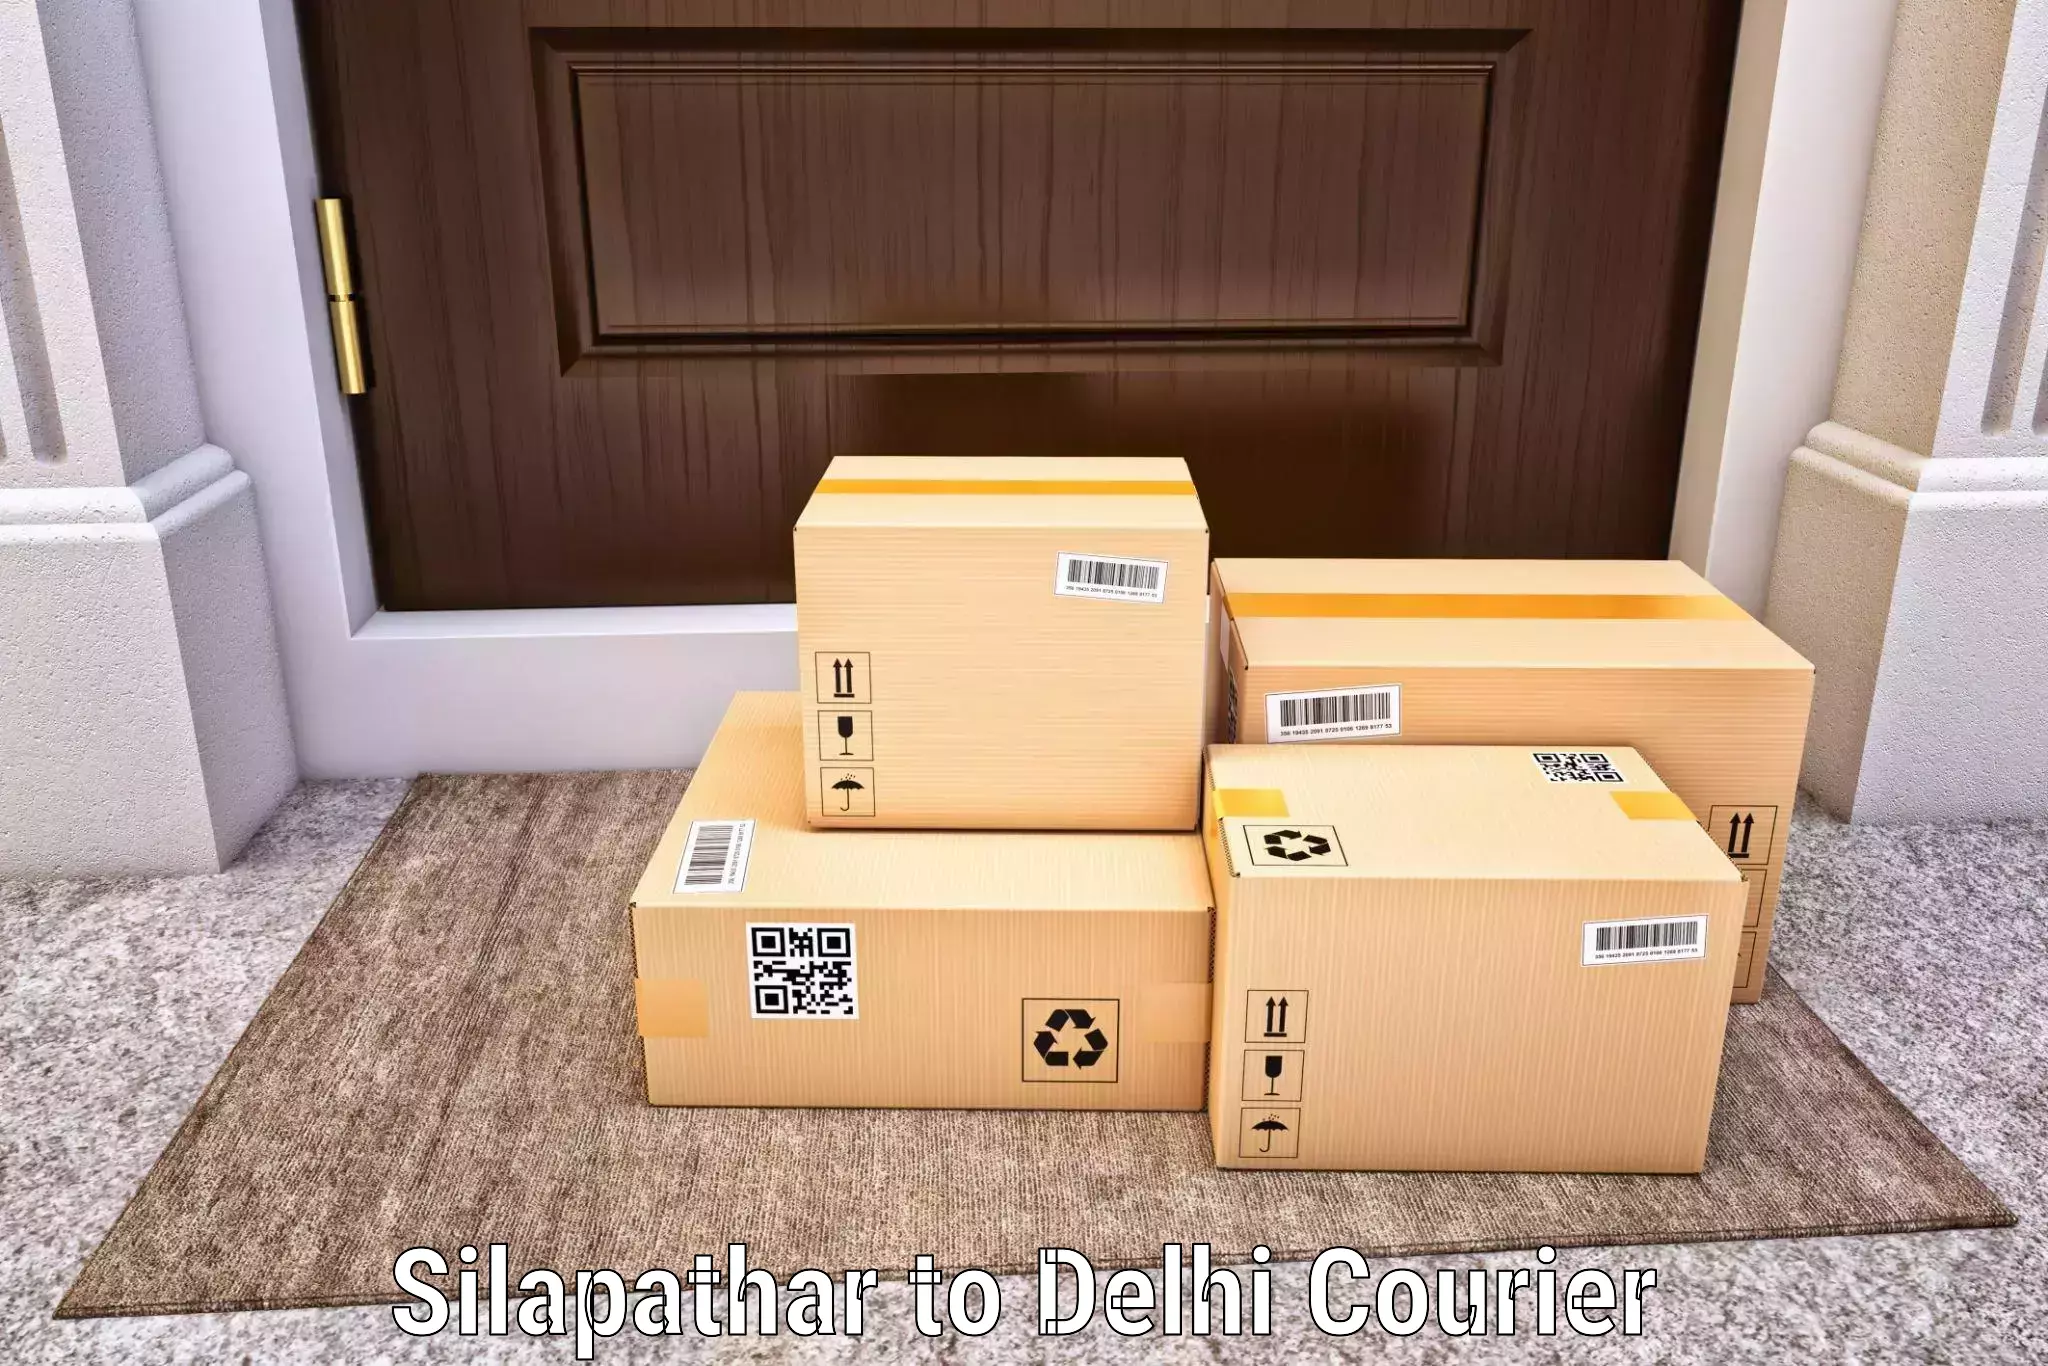 Flexible delivery scheduling Silapathar to Sansad Marg